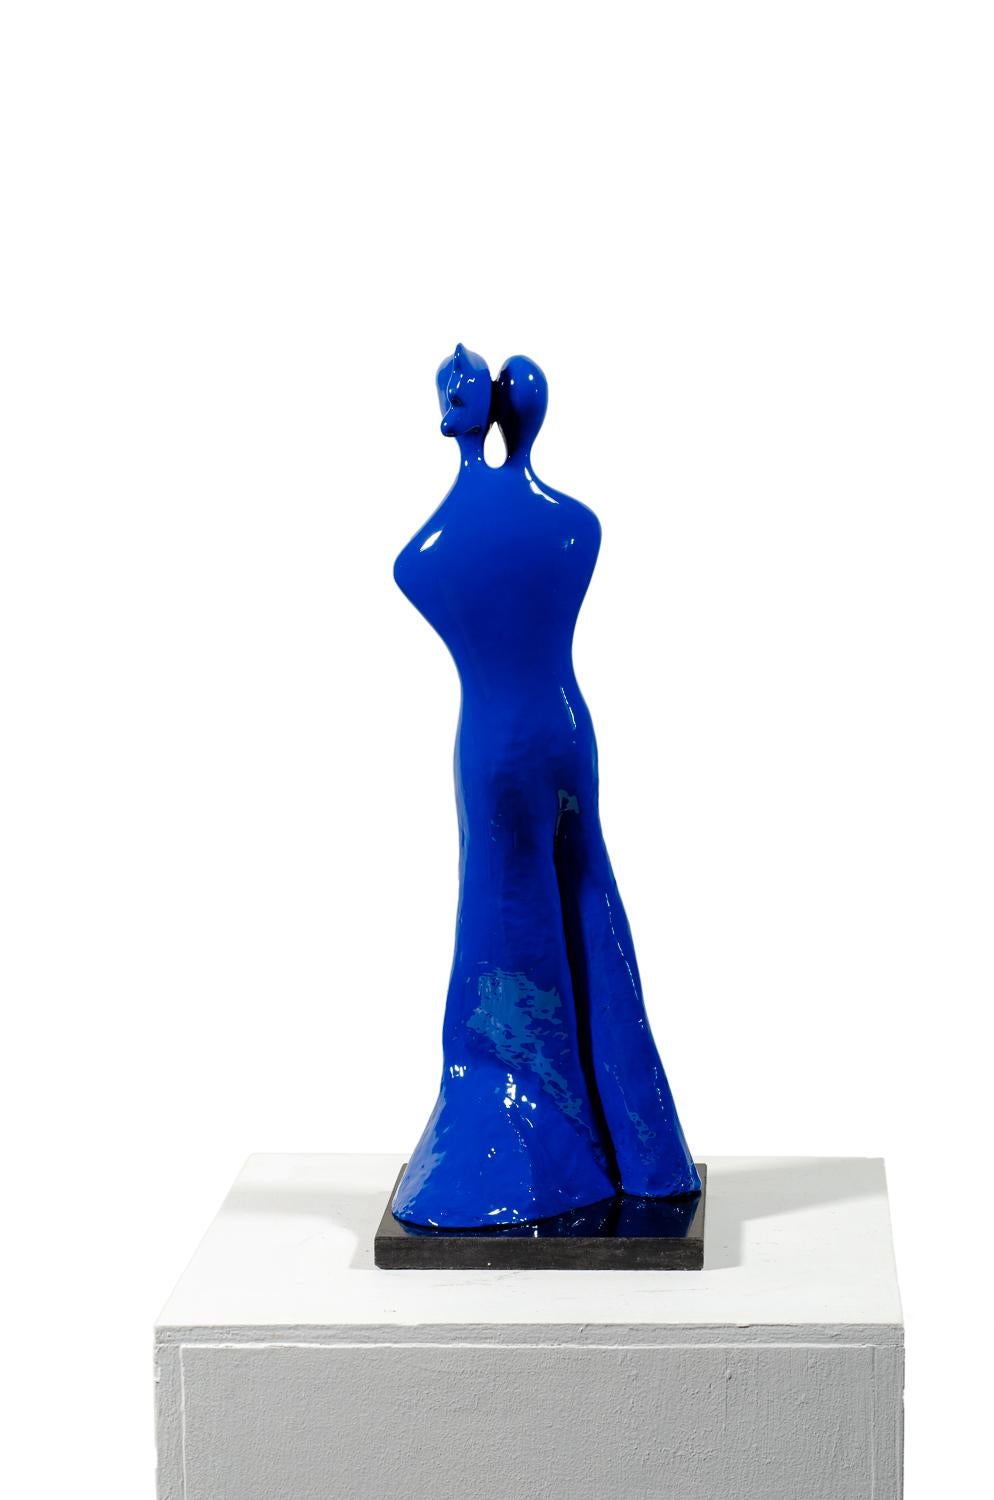 Soulmates #1 S (in blue) is a contemporary bronze sculpture by Beatriz Gerenstein where the artist establish a dialog about the deep mysteries of love. The couple is in love; they became one flesh, one skin, one soul. Their two souls complement one